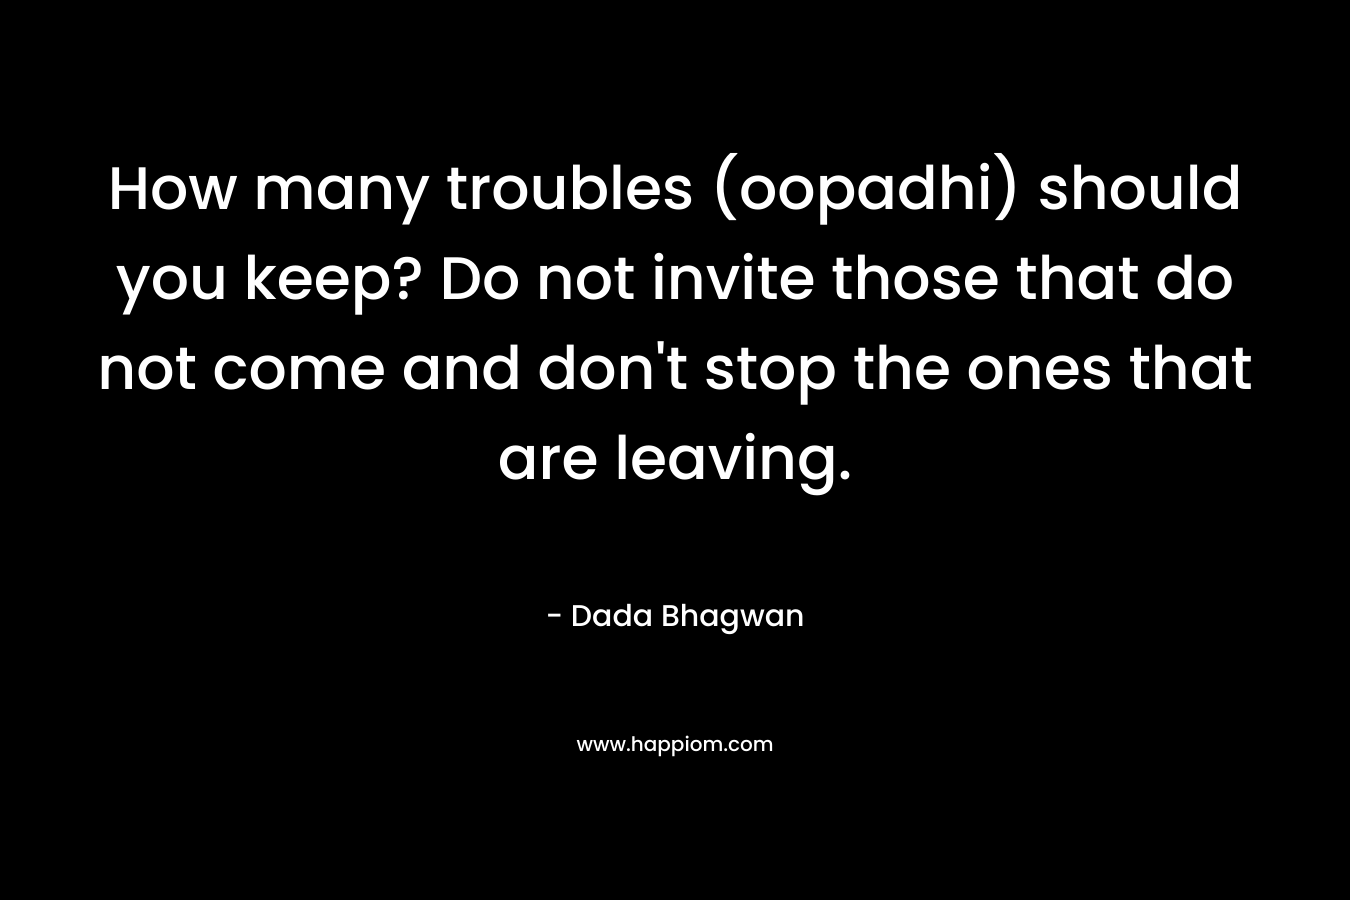 How many troubles (oopadhi) should you keep? Do not invite those that do not come and don't stop the ones that are leaving.